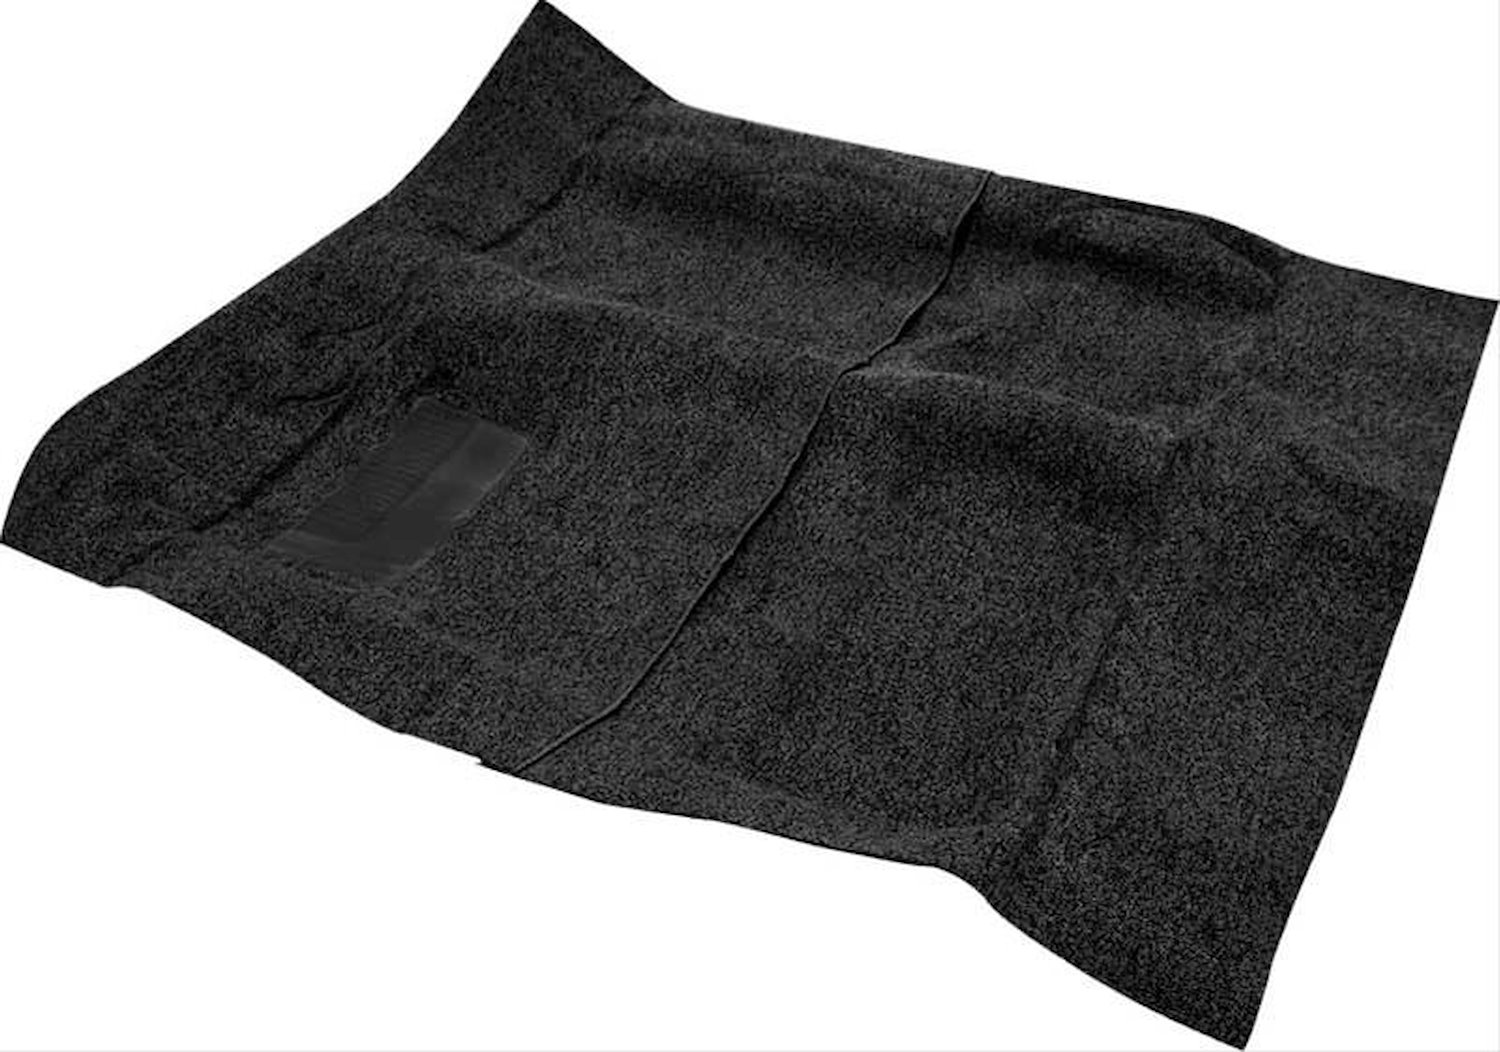 MB9871001 Loop Carpet 1963-64 Plymouth Fury 4-Door With Auto Trans Olive Black Tuxedo